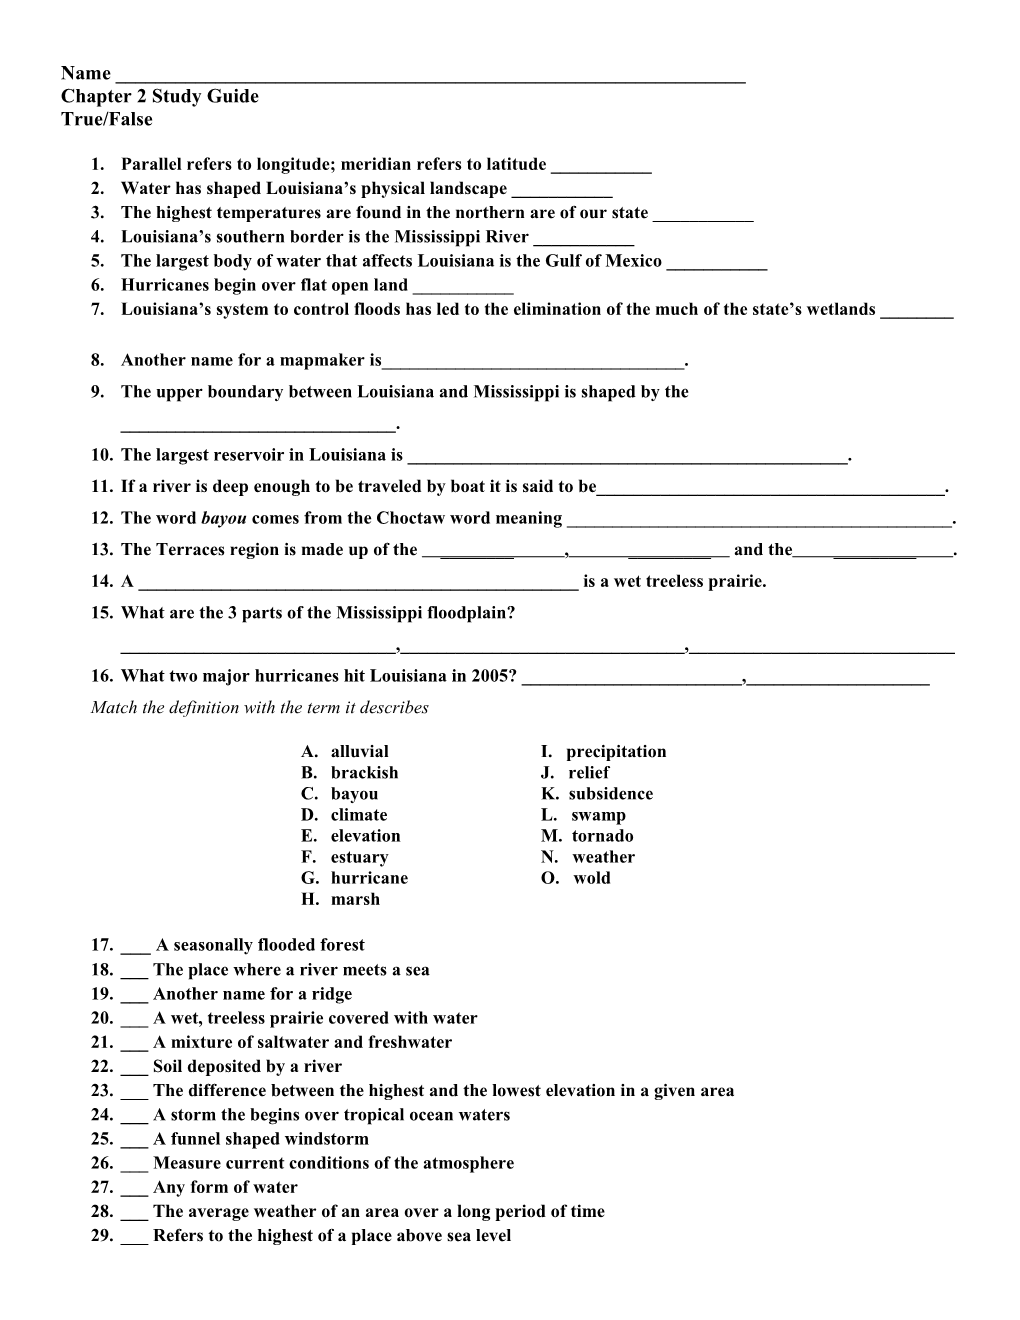 Name ______ Chapter 2 Study Guide